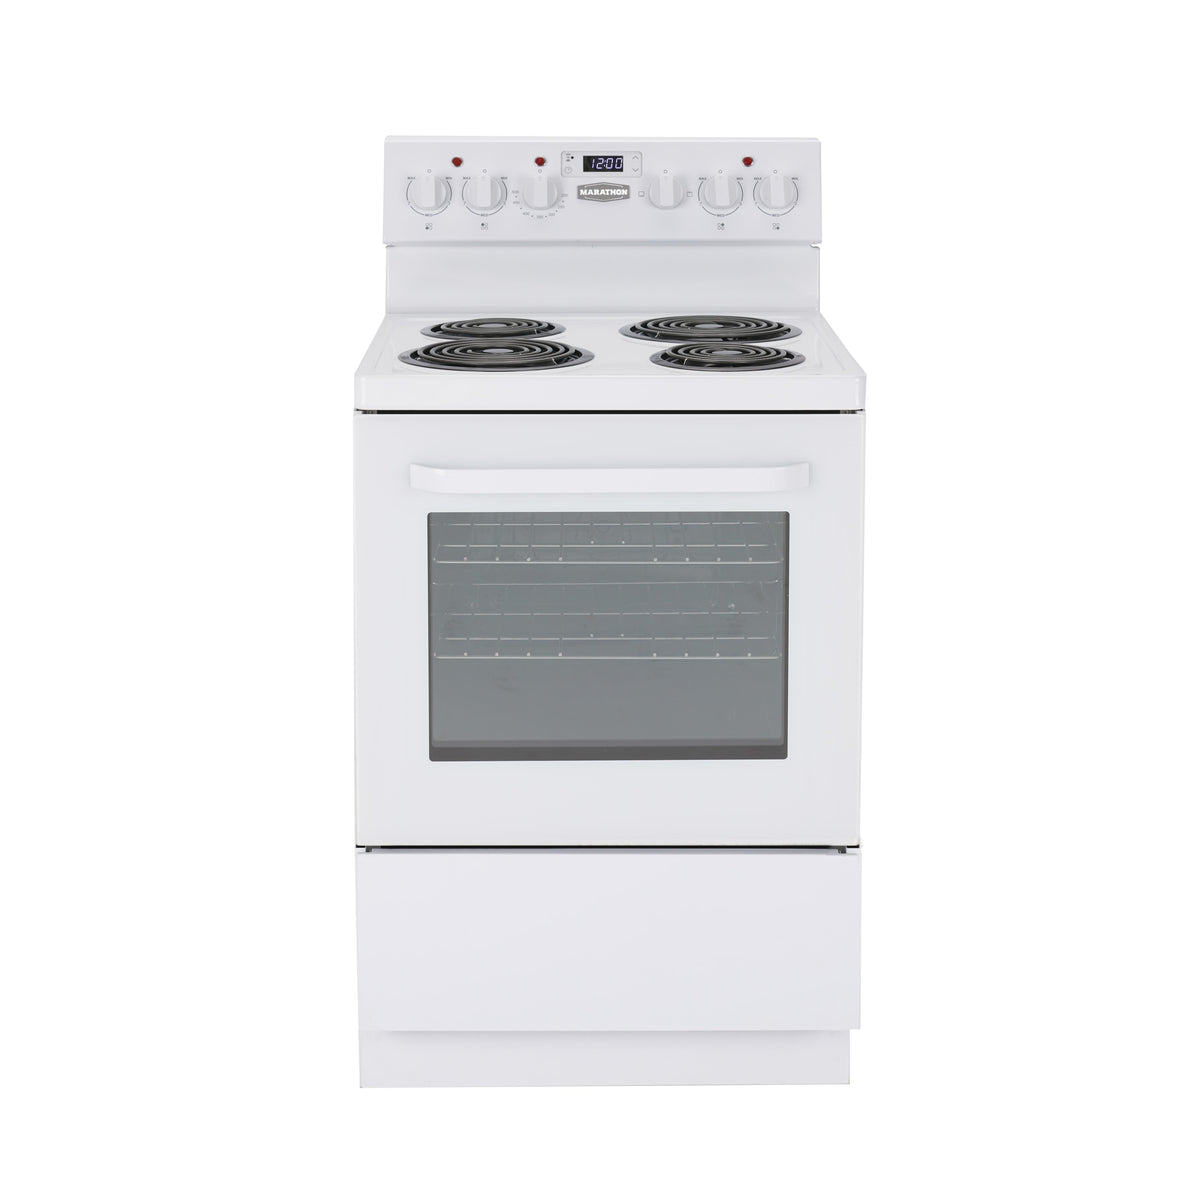 24-inch Electric Coil Range with Temperature Regulating Elements MER243W IMAGE 1